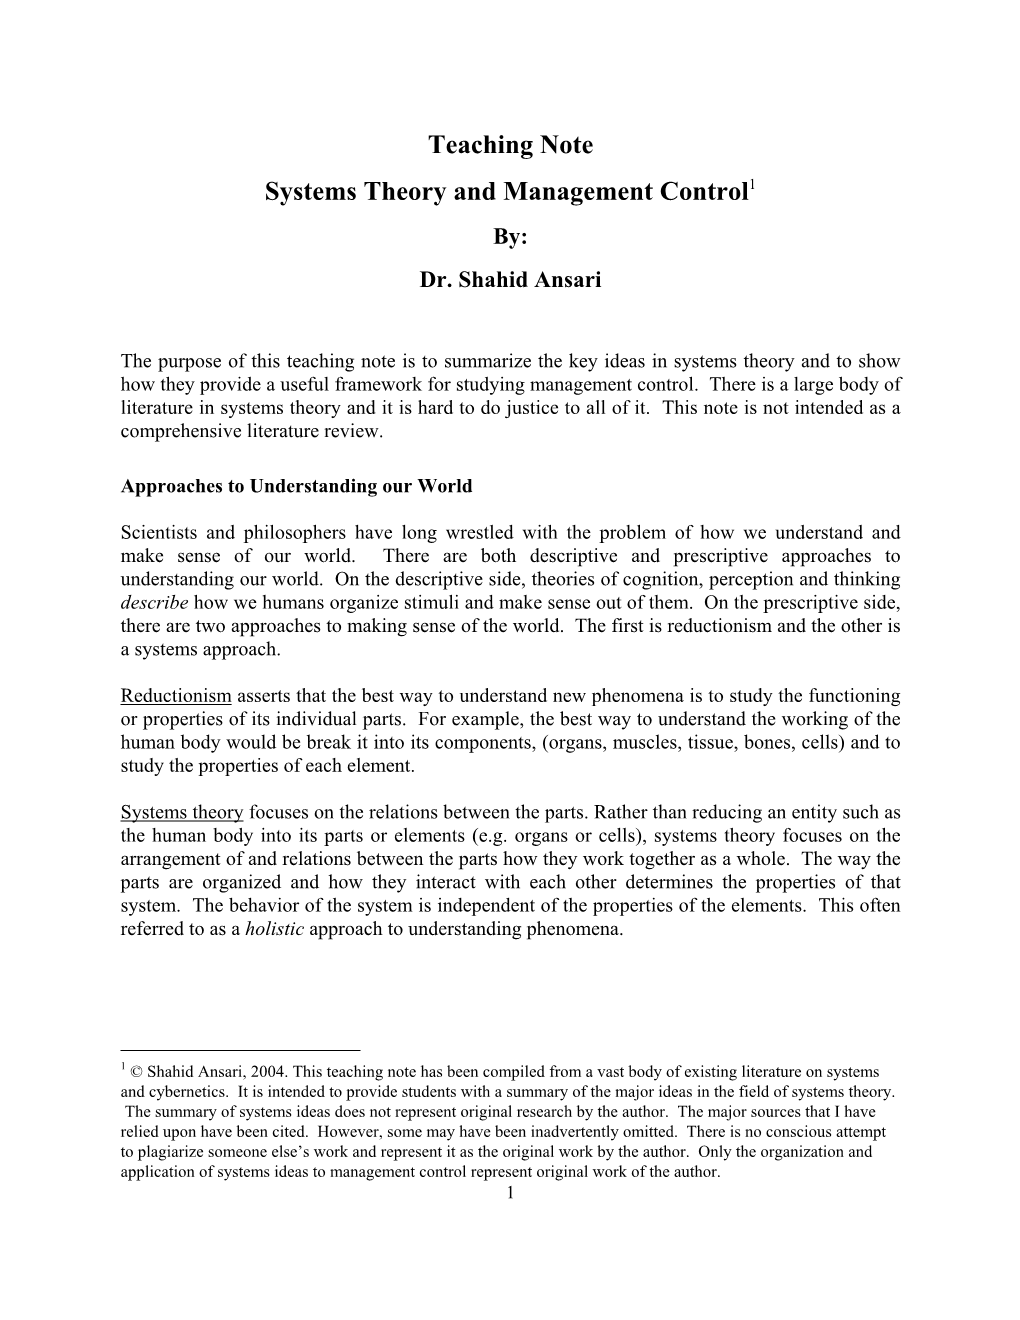 Teaching Note Systems Theory and Management Control1 By: Dr